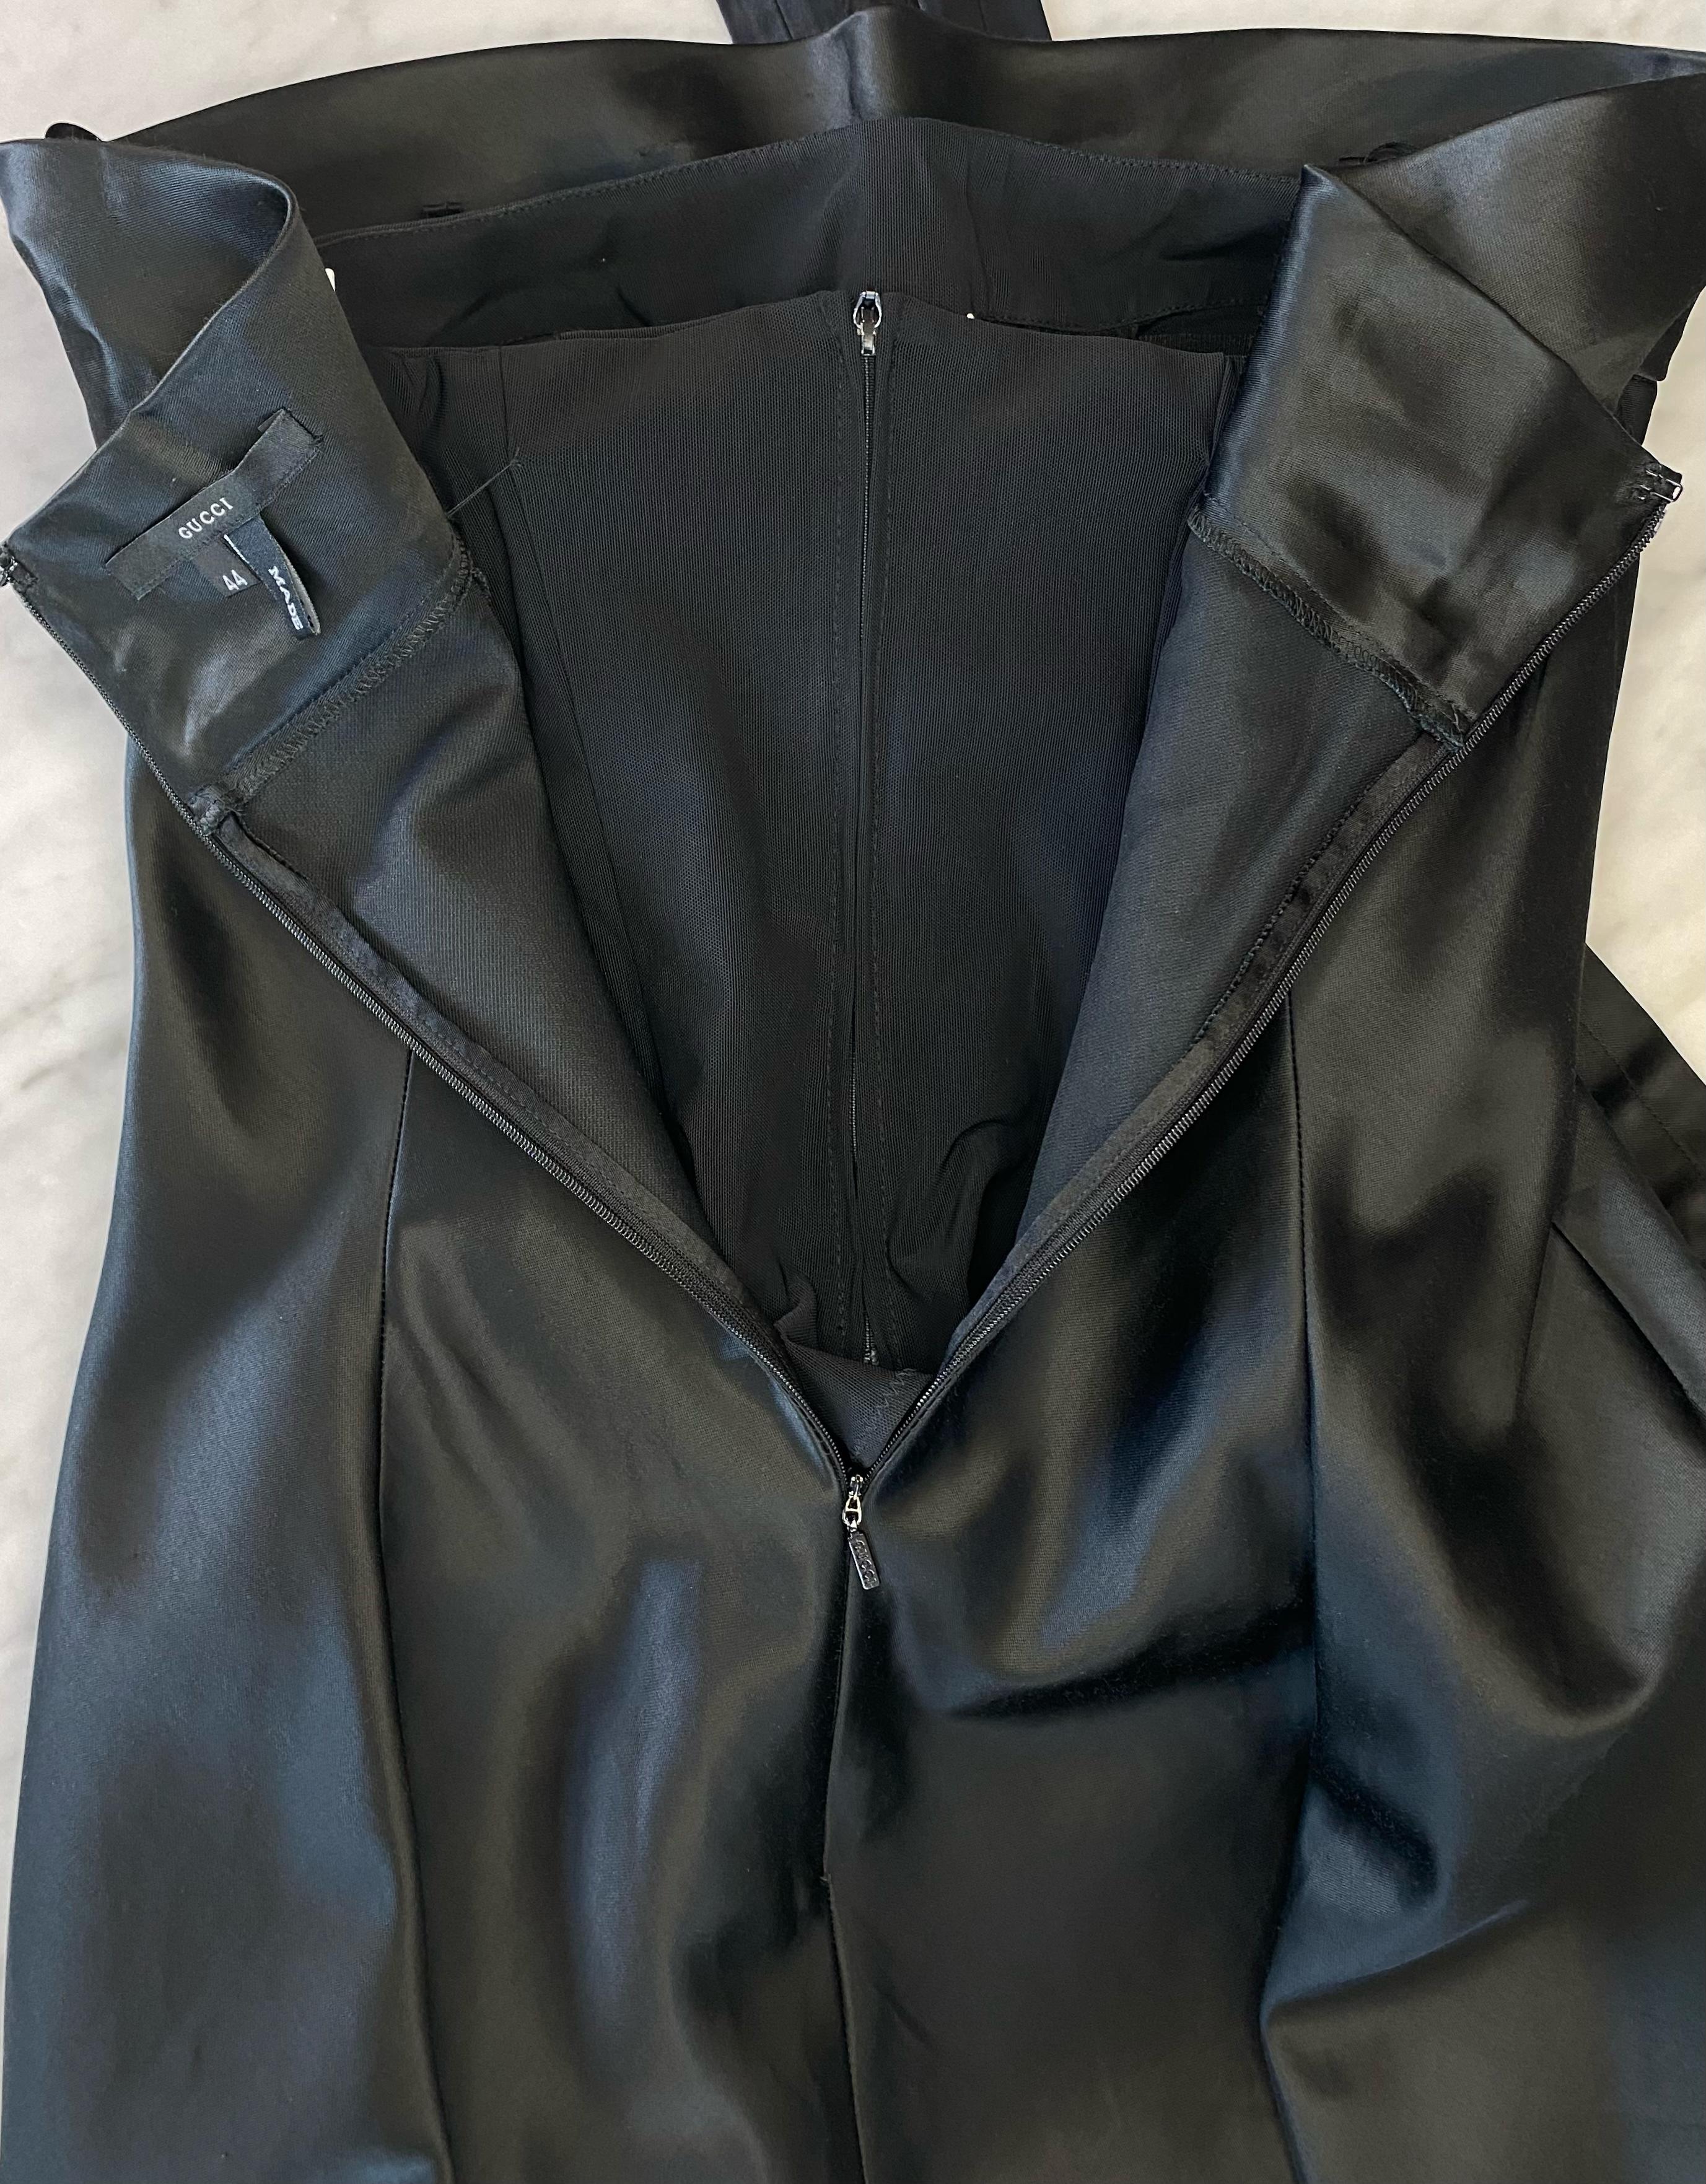 Women's S/S 2001 Gucci by Tom Ford Corseted Black Satin Strapless Tube Dress Runway 